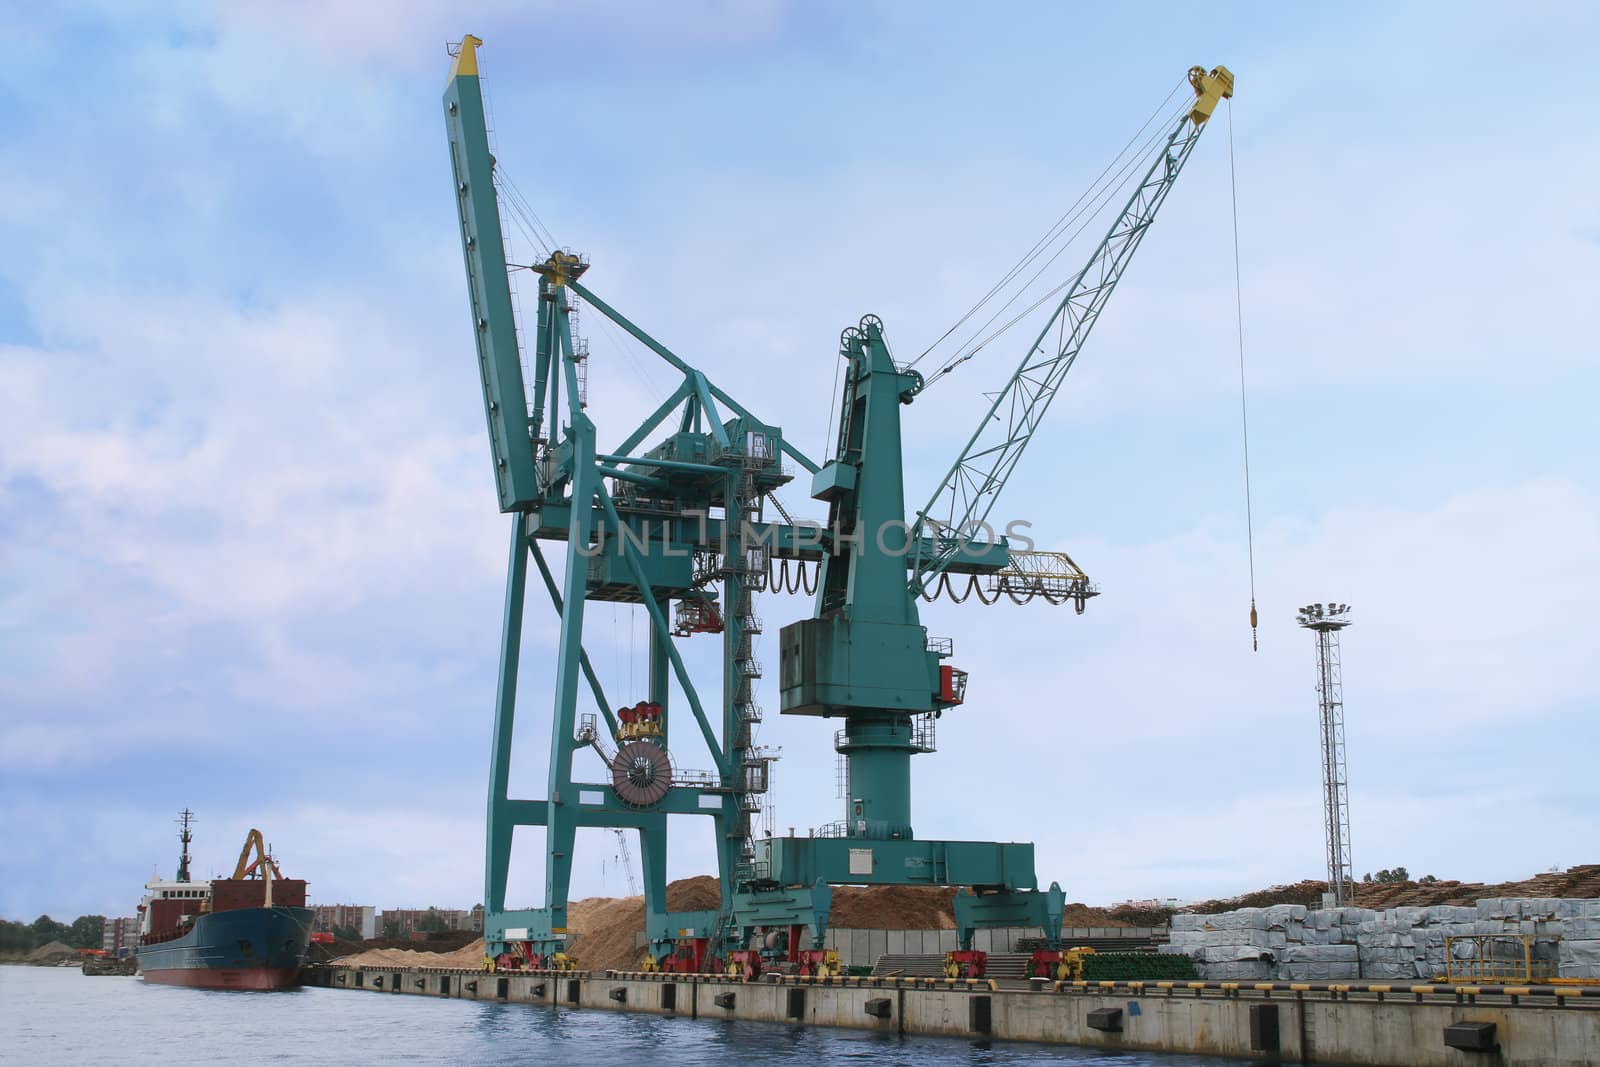 Container cranes for loading and unloading ships